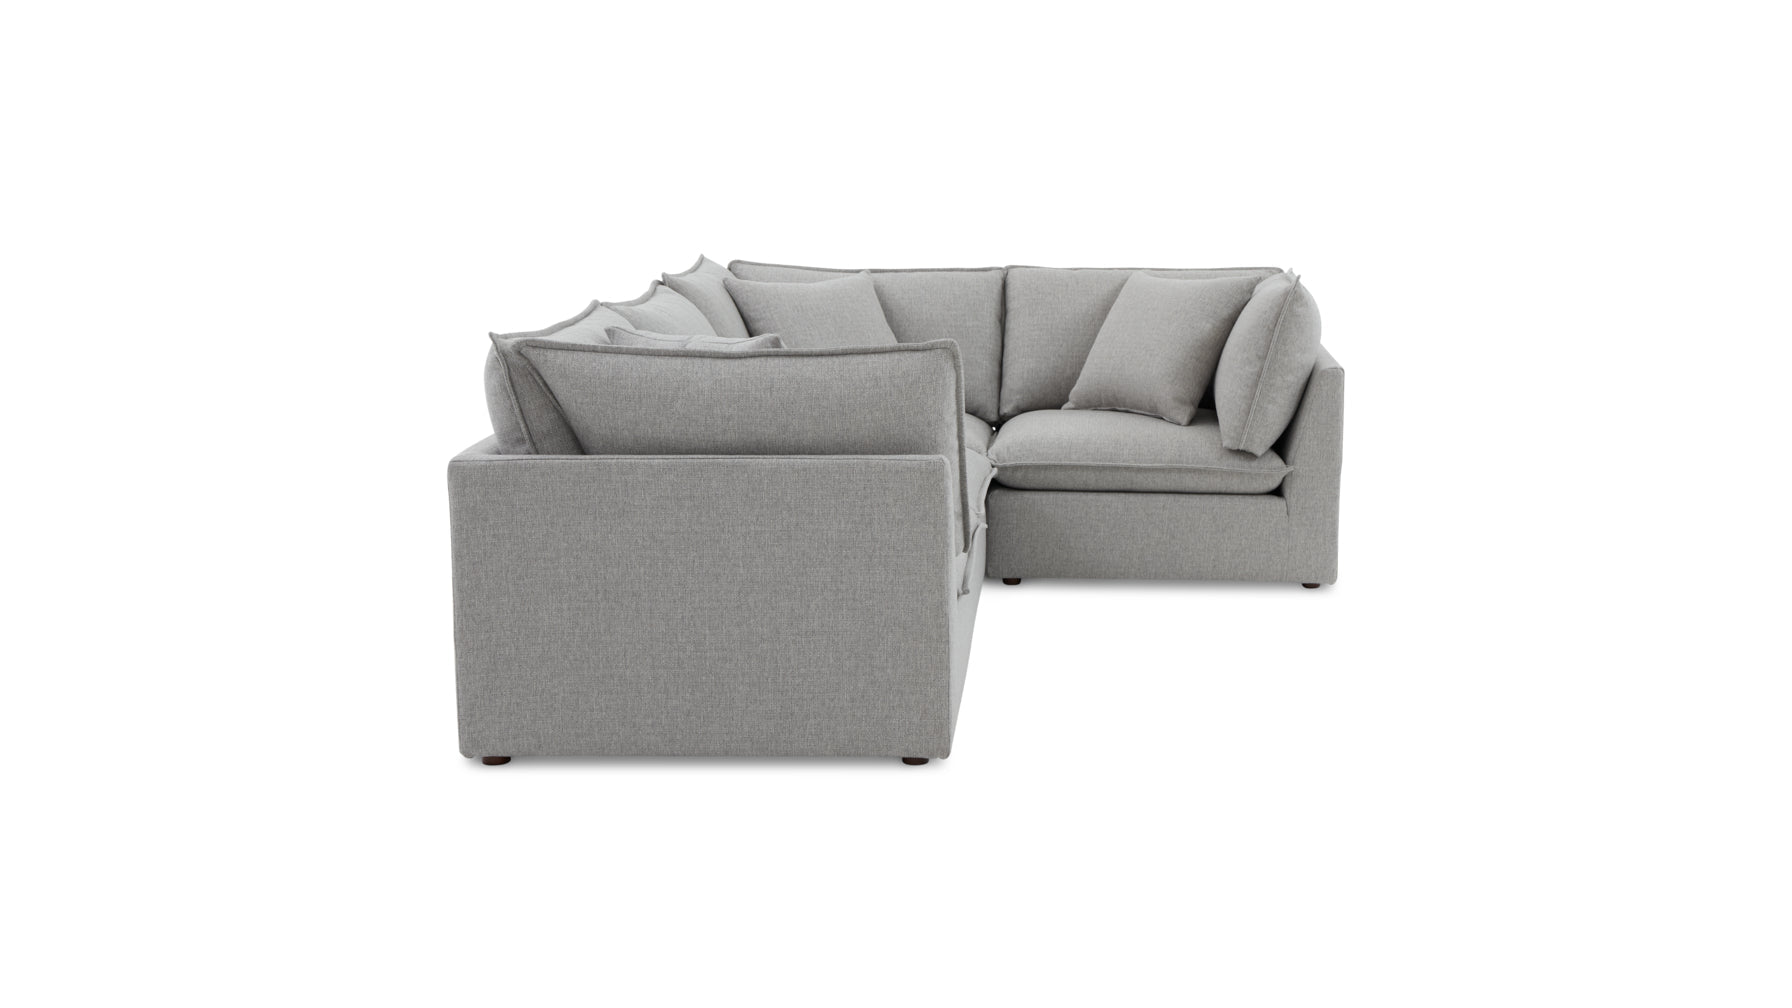 Chill Time 4-Piece Modular Sectional Closed, Heather - Image 3